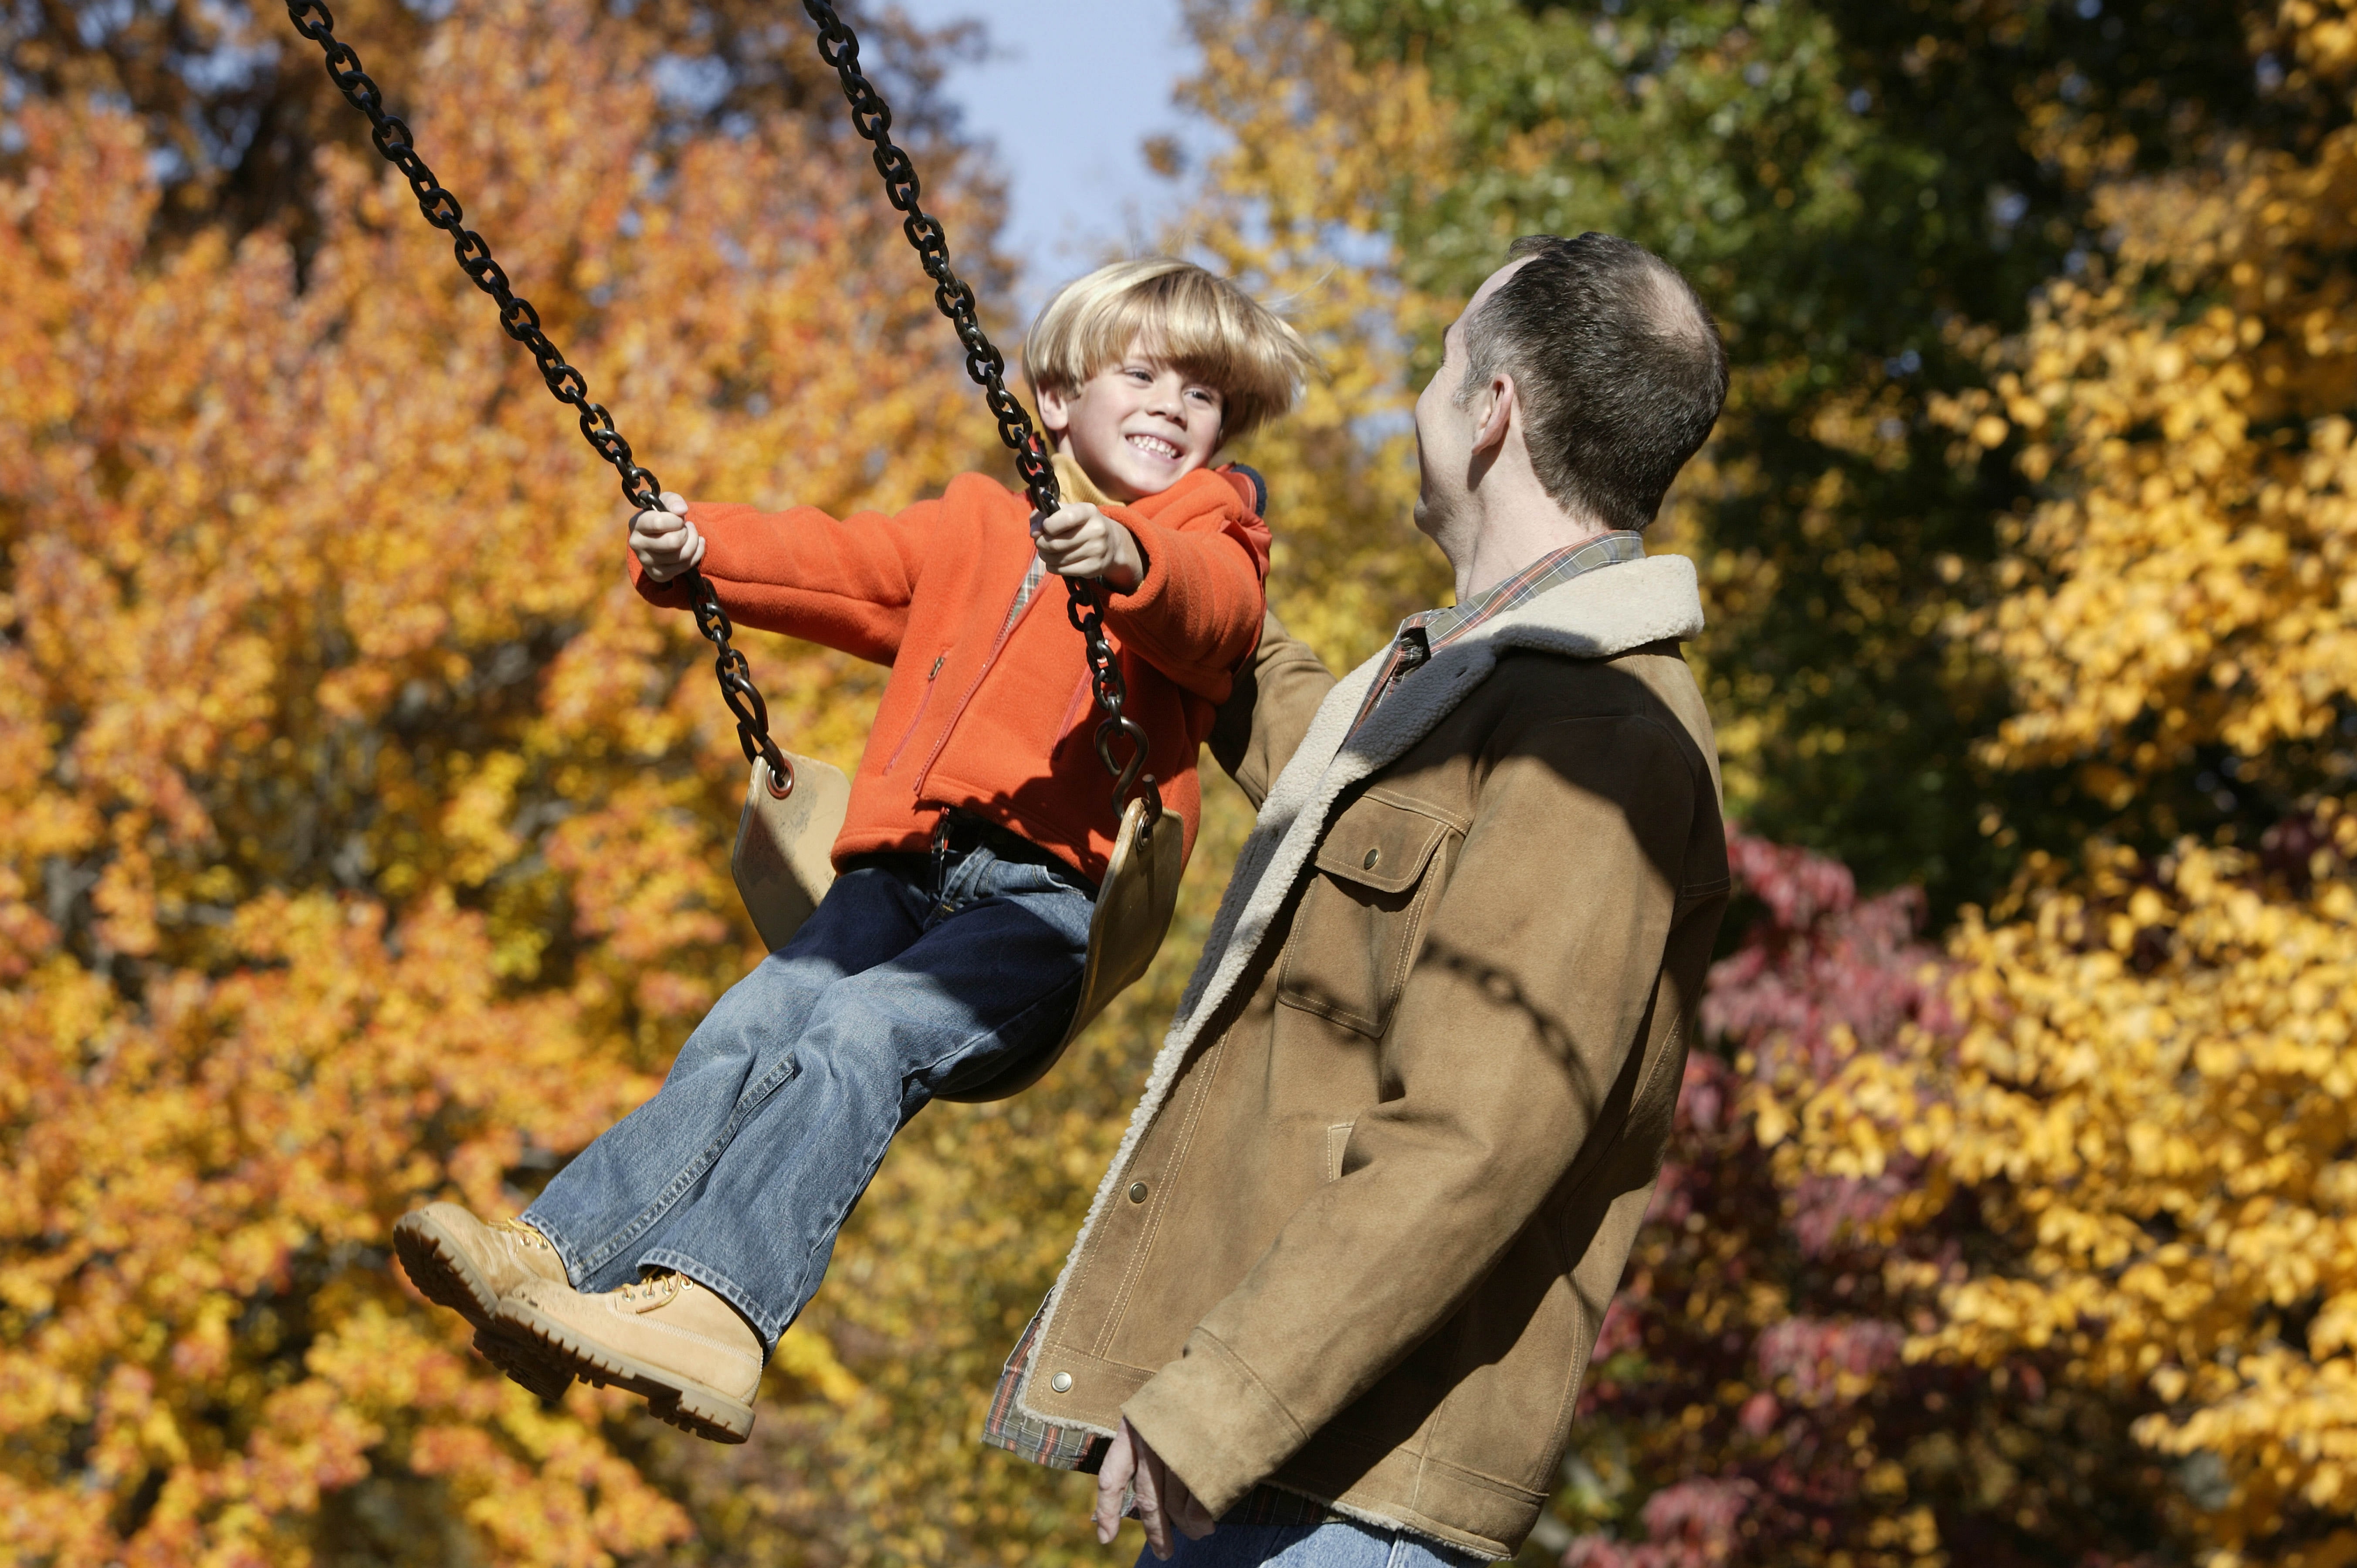 father helping his child playing outdoor swing chair